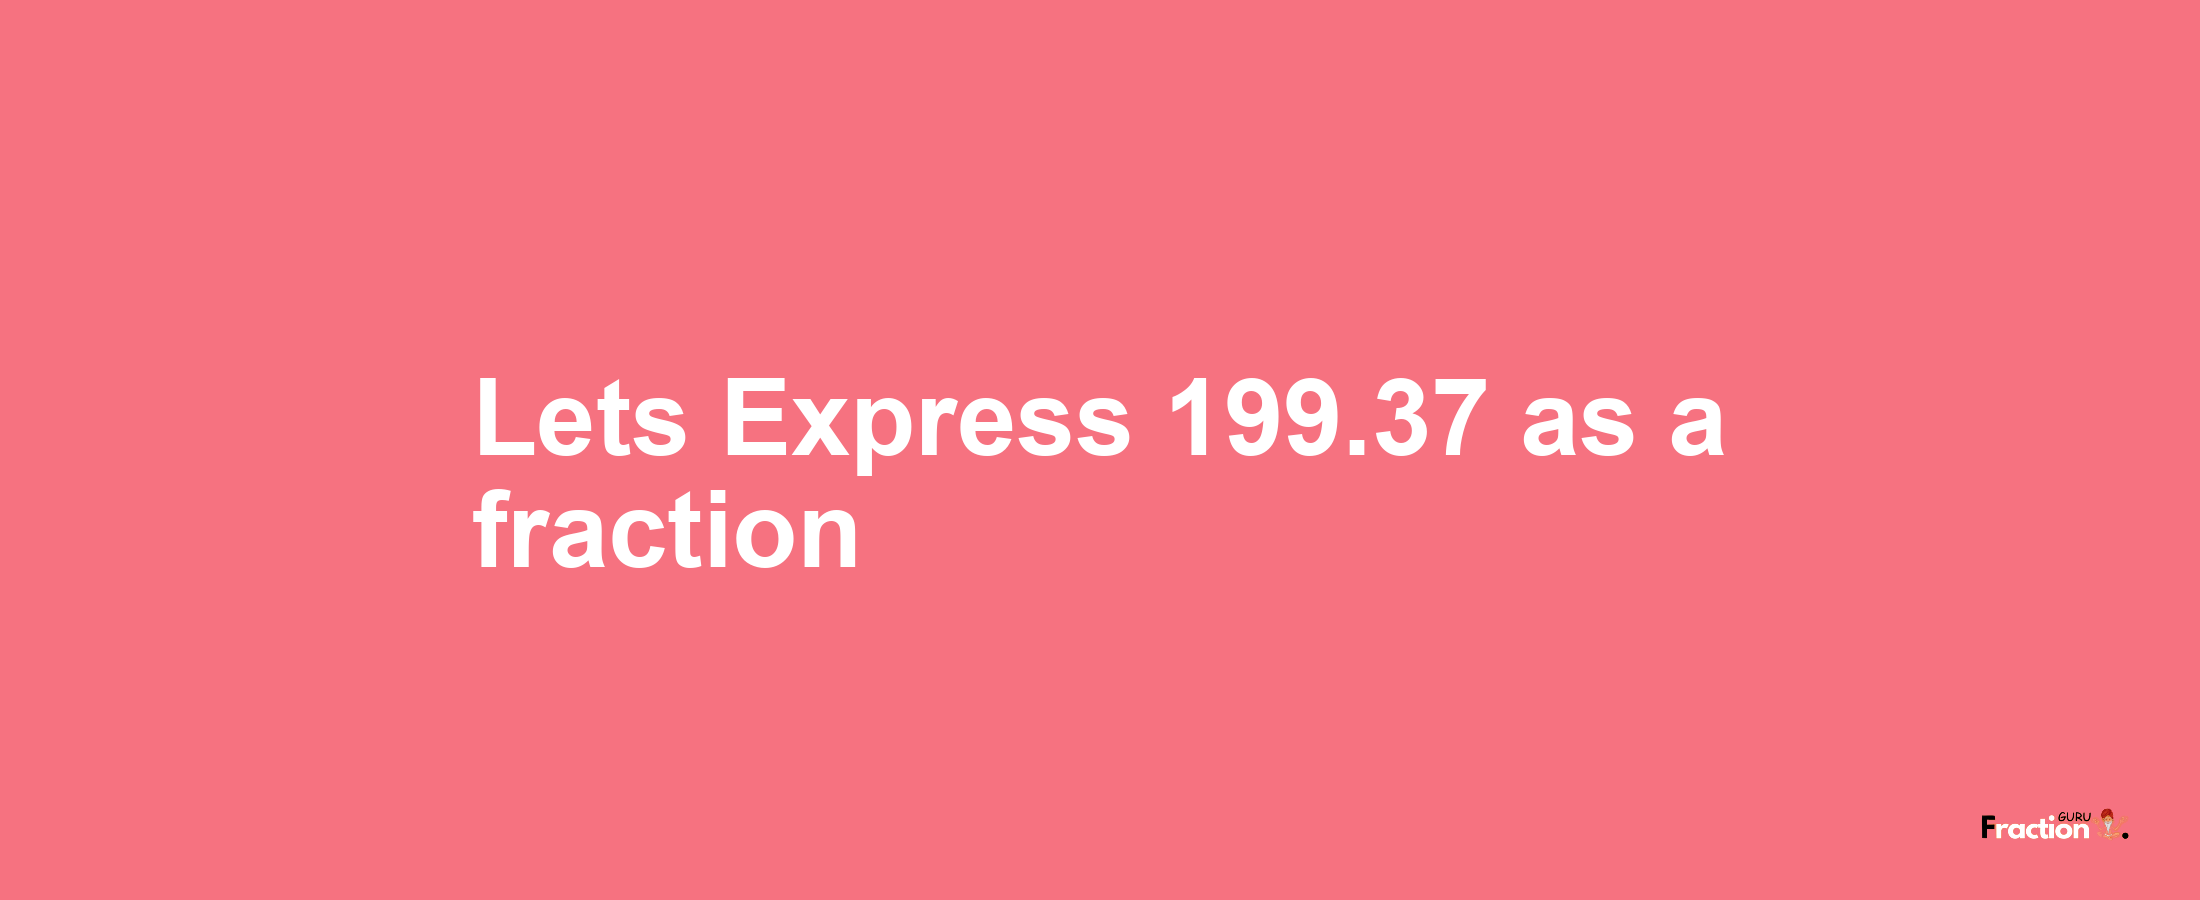 Lets Express 199.37 as afraction